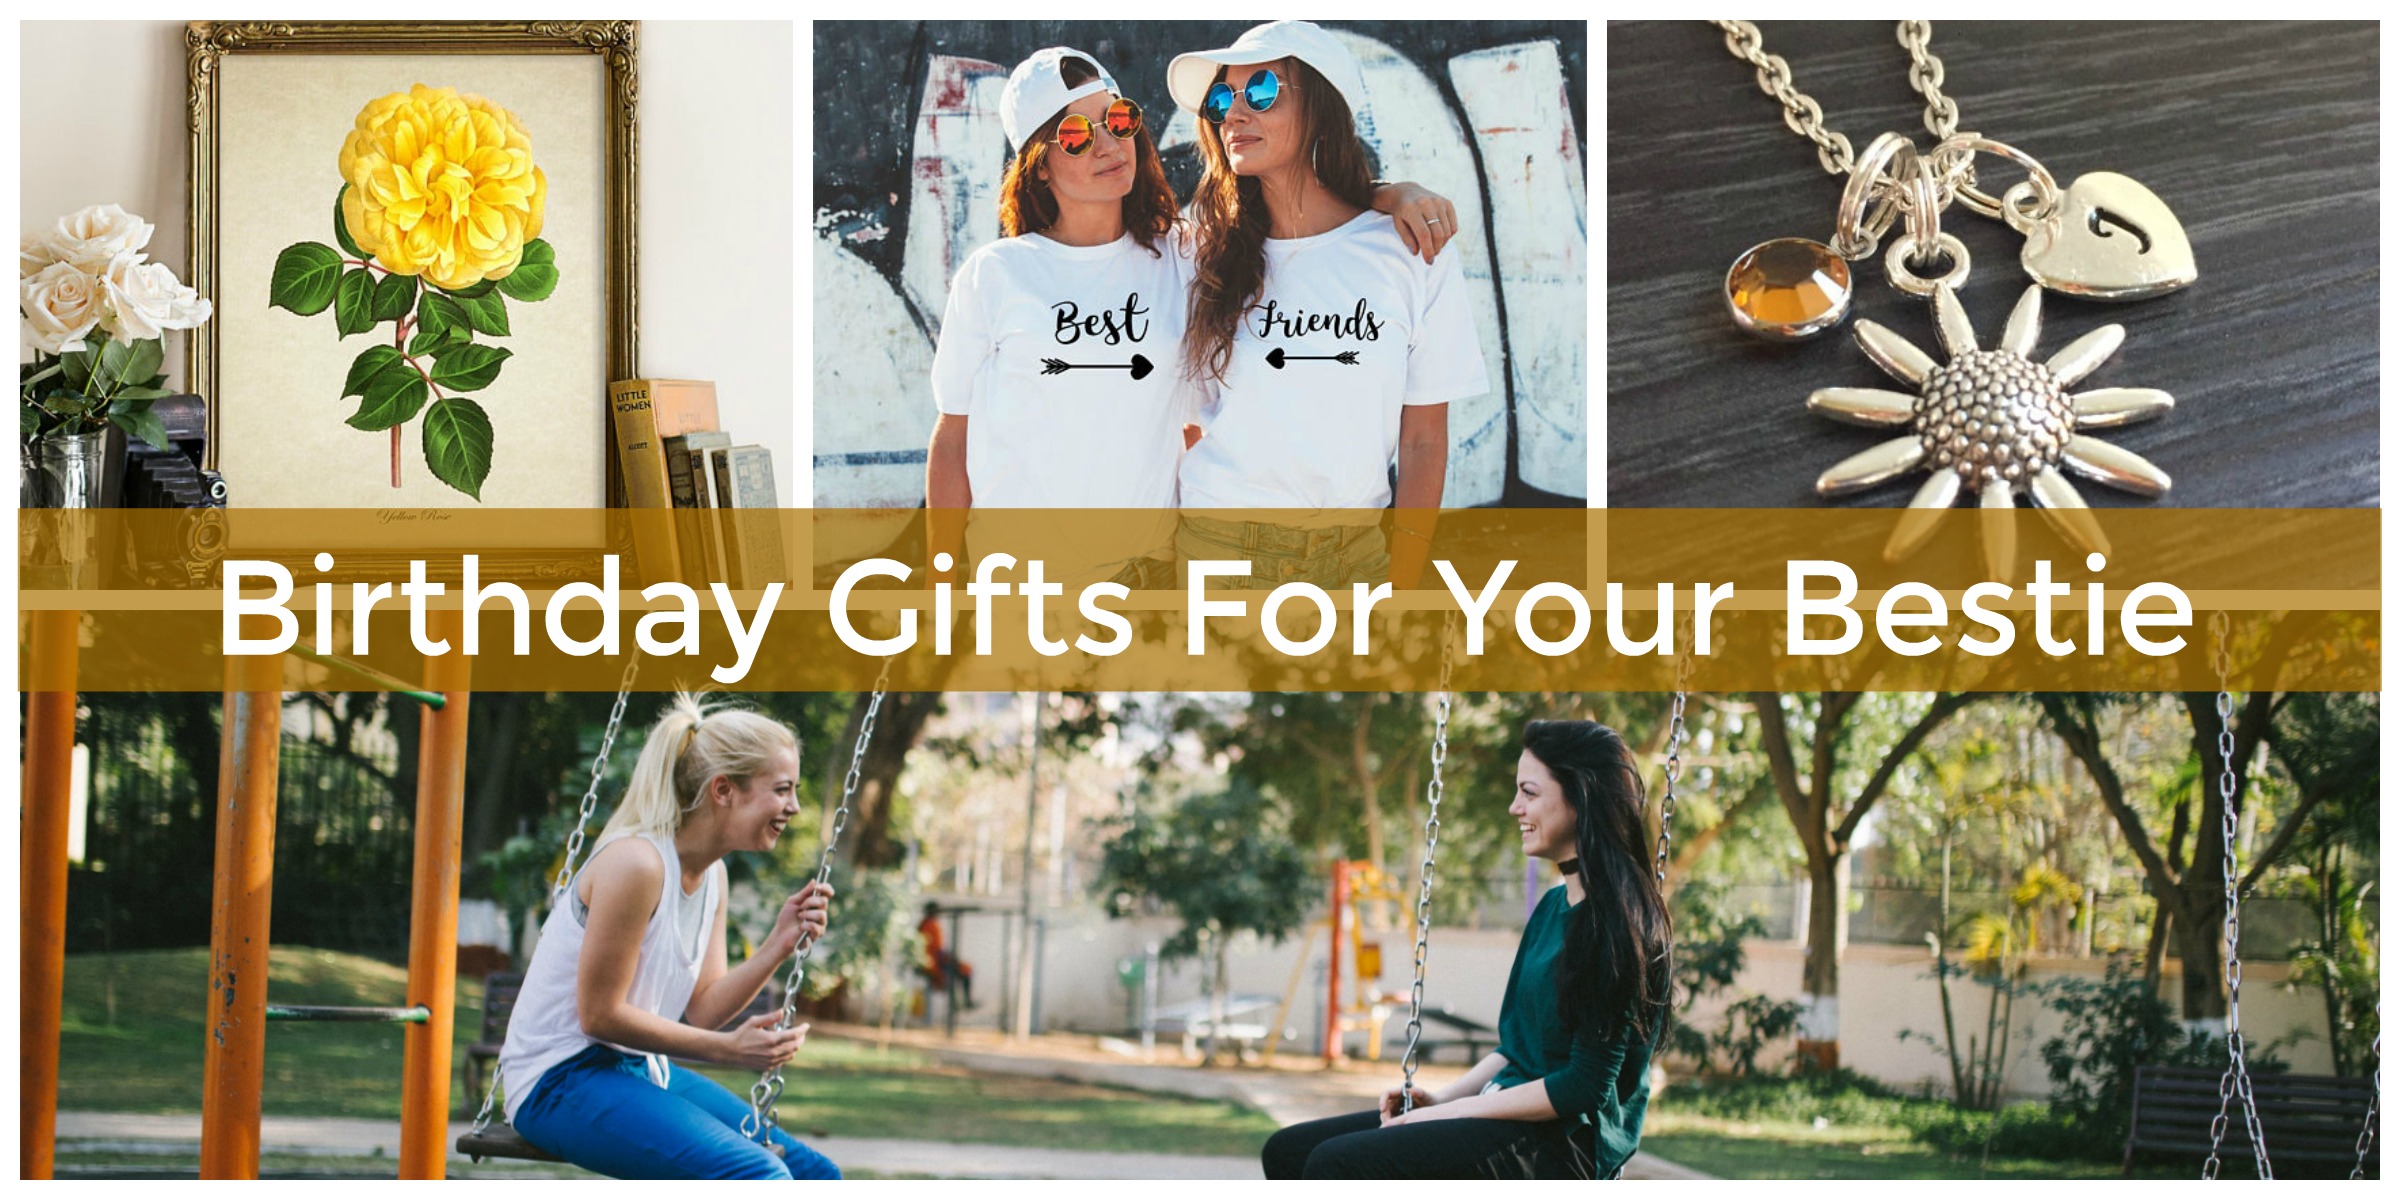 bday gift ideas for your best friend: make her birthday special